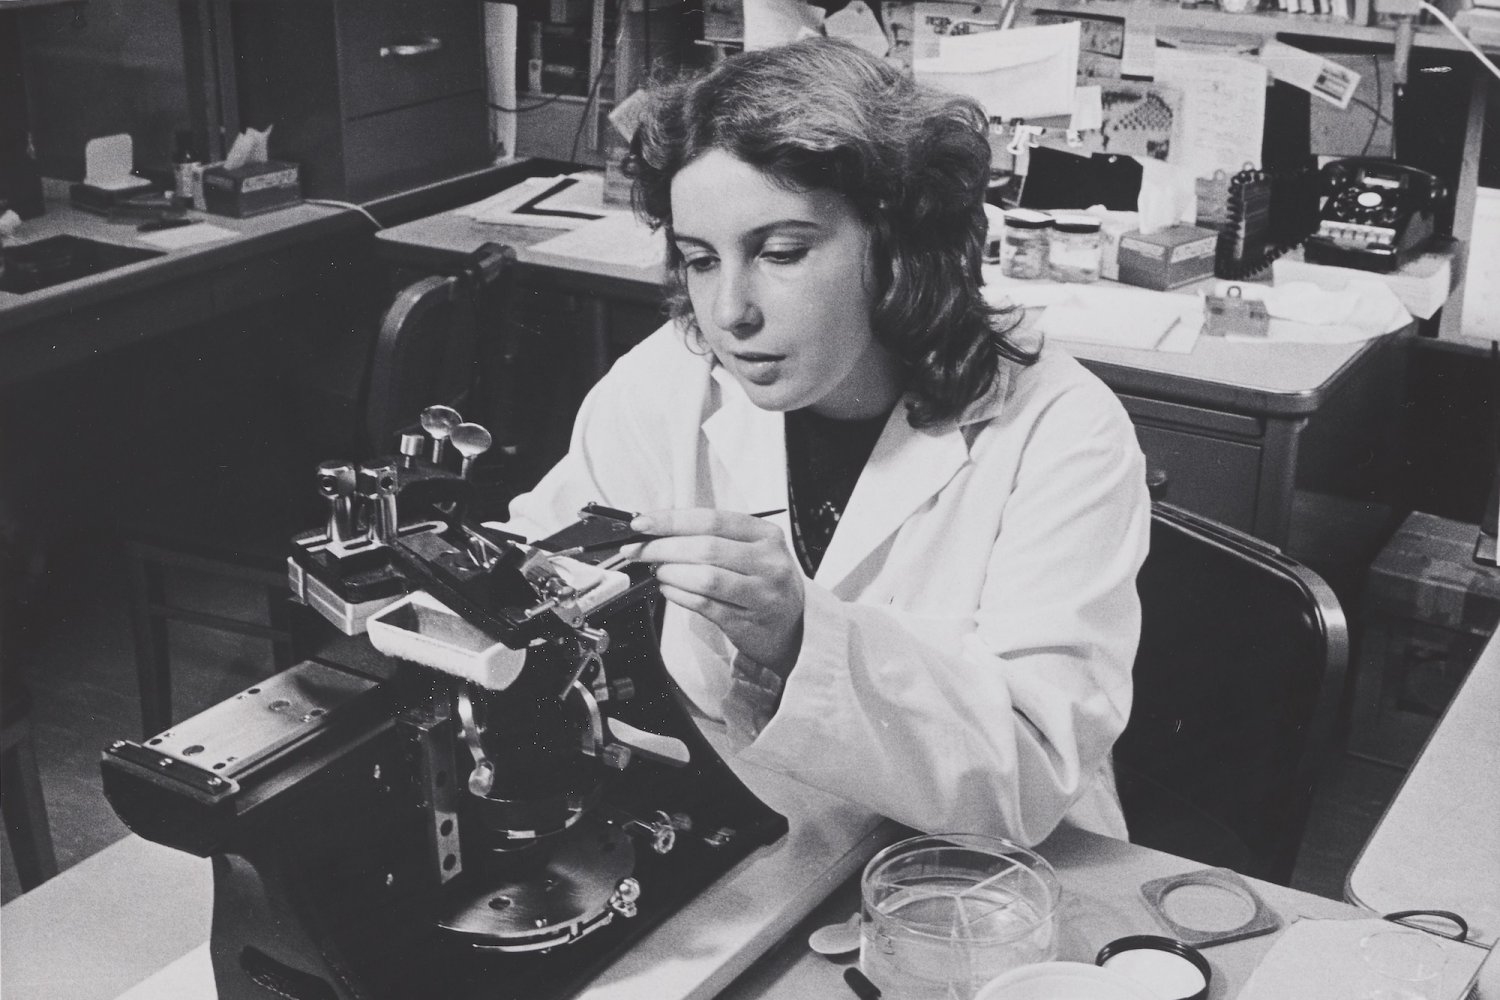 Anne Serby works in a lab setting in 1980 as depicted in a black and white photo.